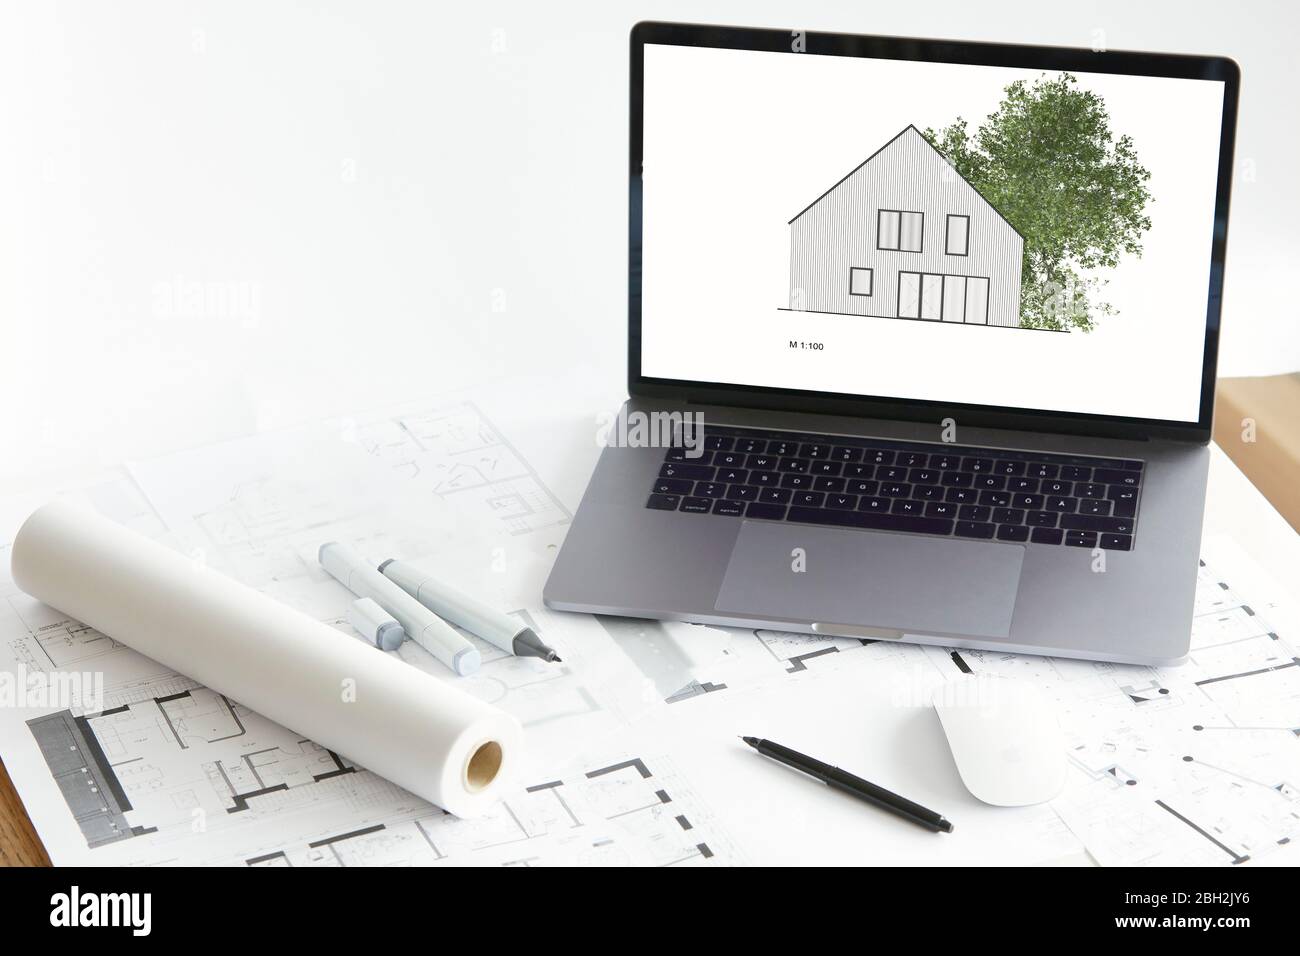 Architecture model of home ownership with tree on screen of laptop, construction plan Stock Photo